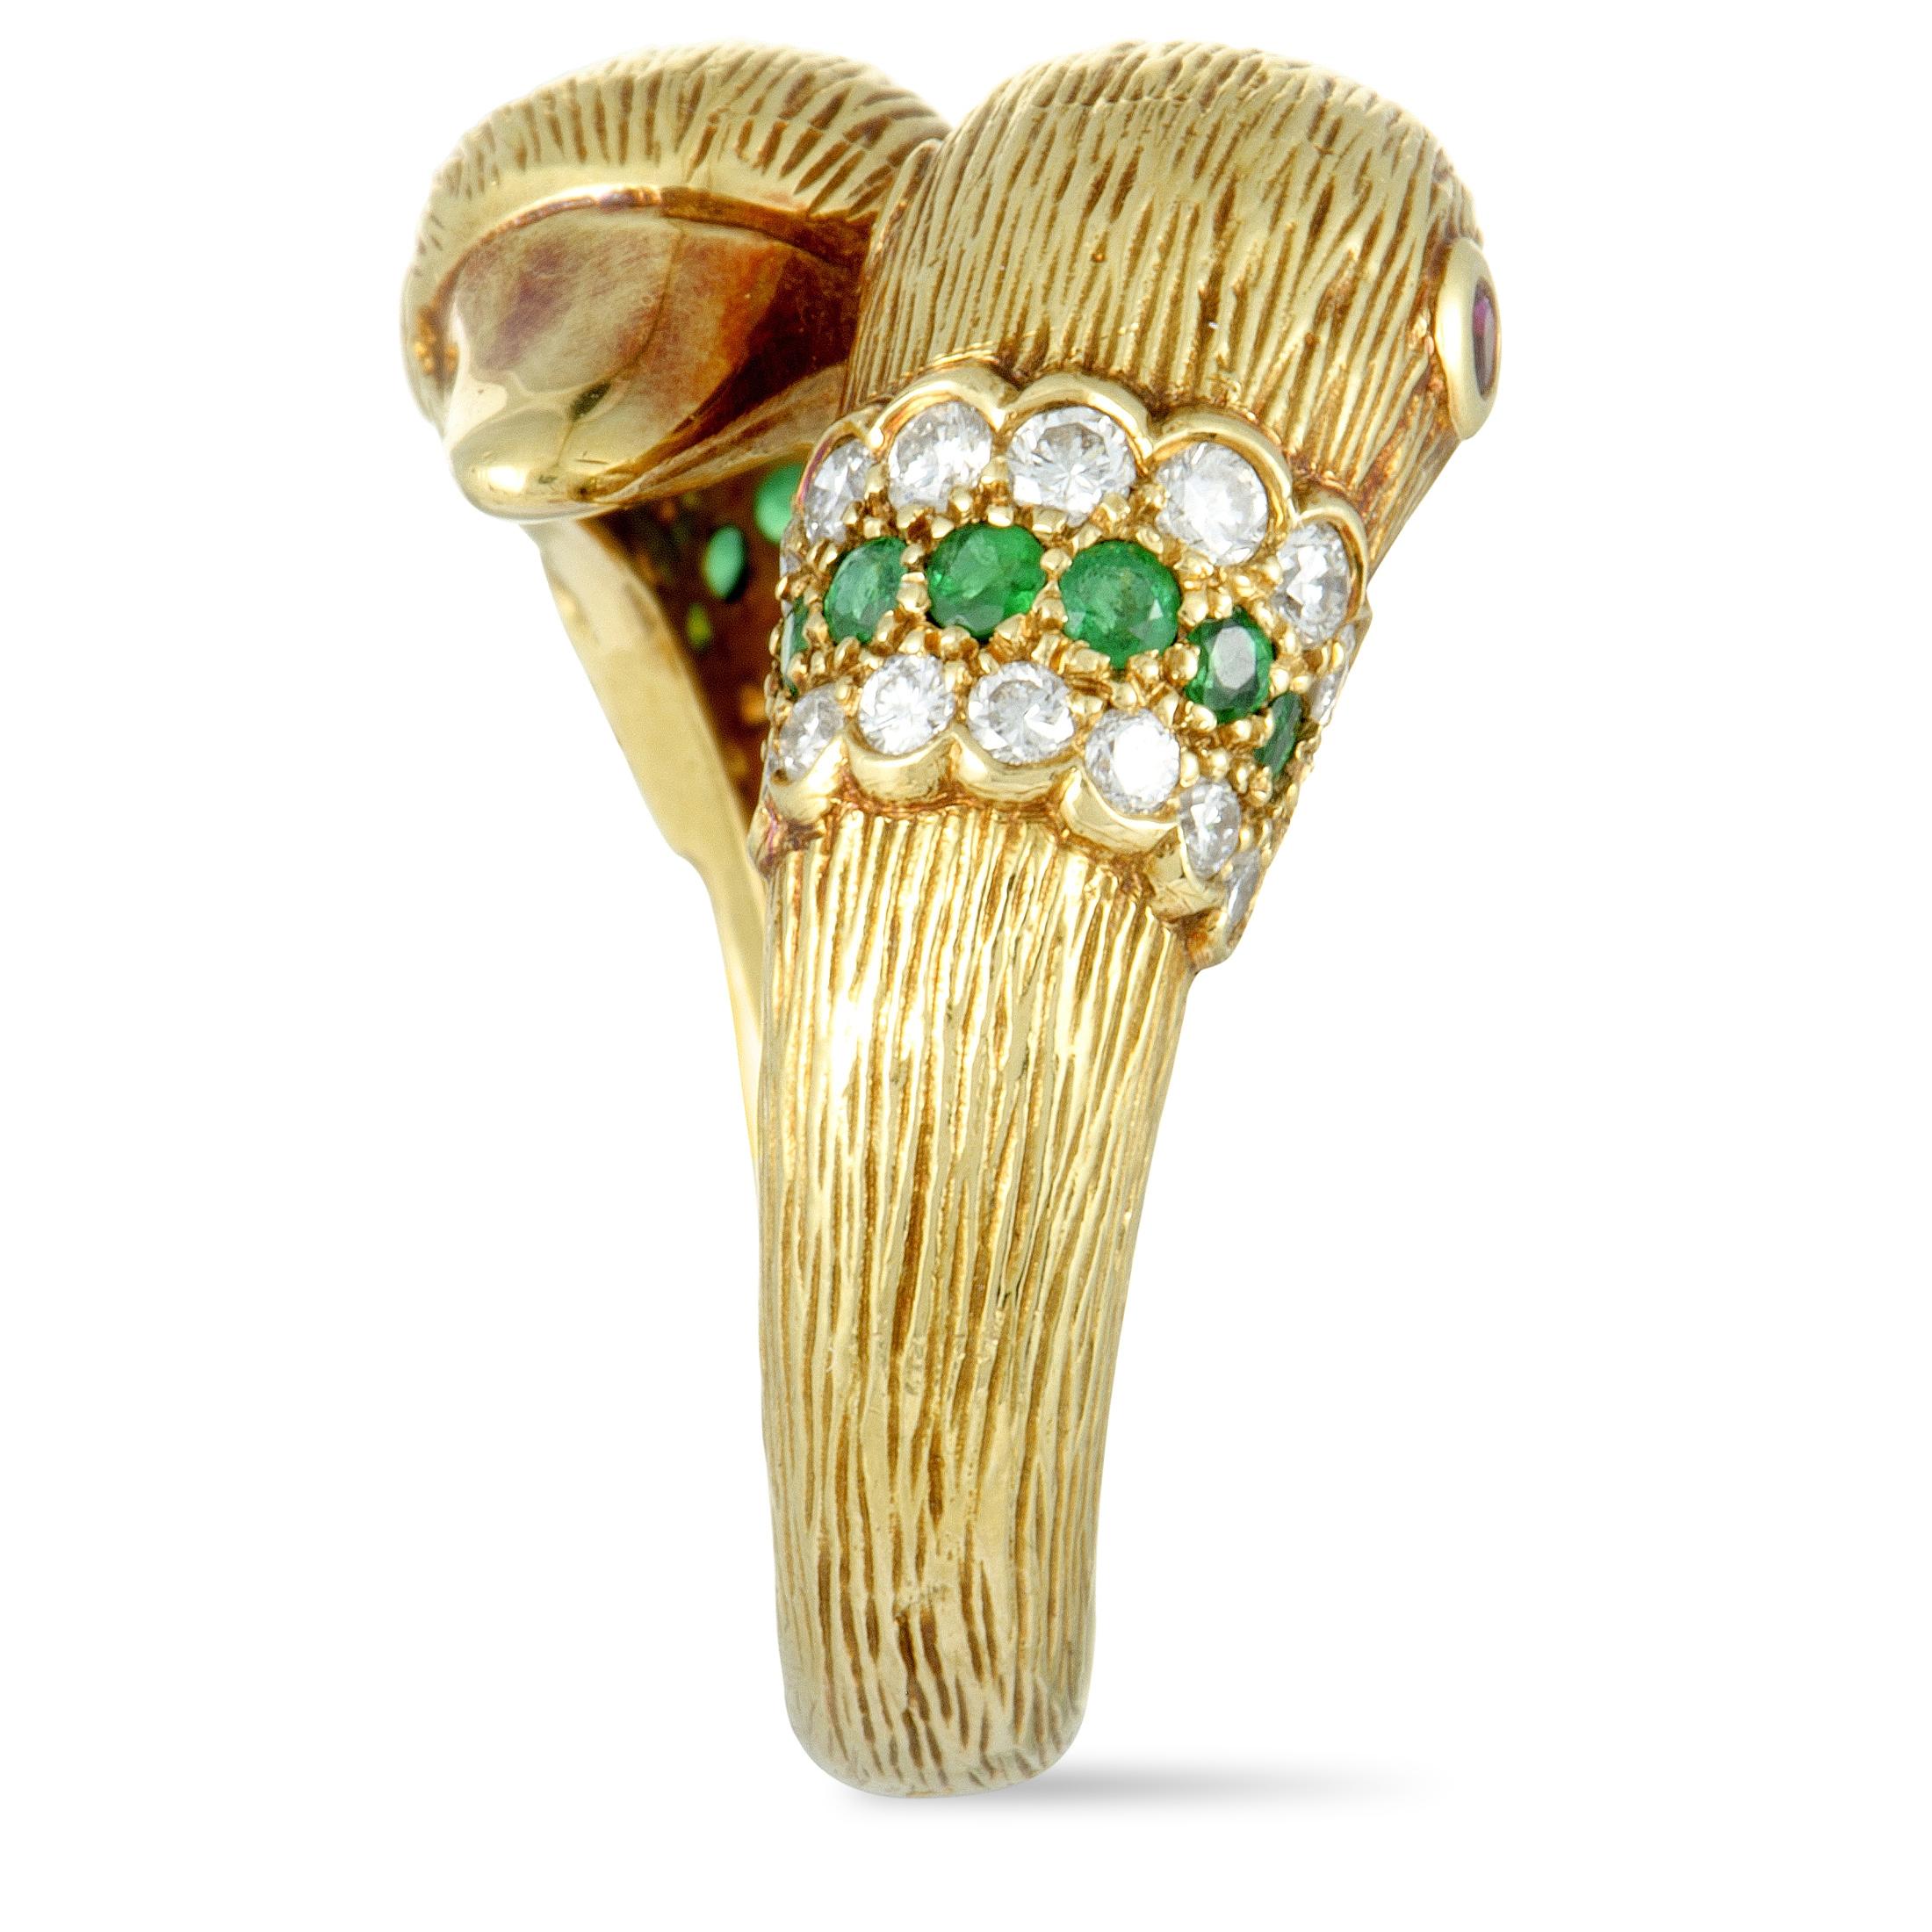 A fascinating vintage piece from the renowned French luxury brand Van Cleef & Arpels, this exceptional ring depicts lovely swans in a compellingly luxurious fashion. The ring is wonderfully made of 18K yellow gold and beautifully decorated with an